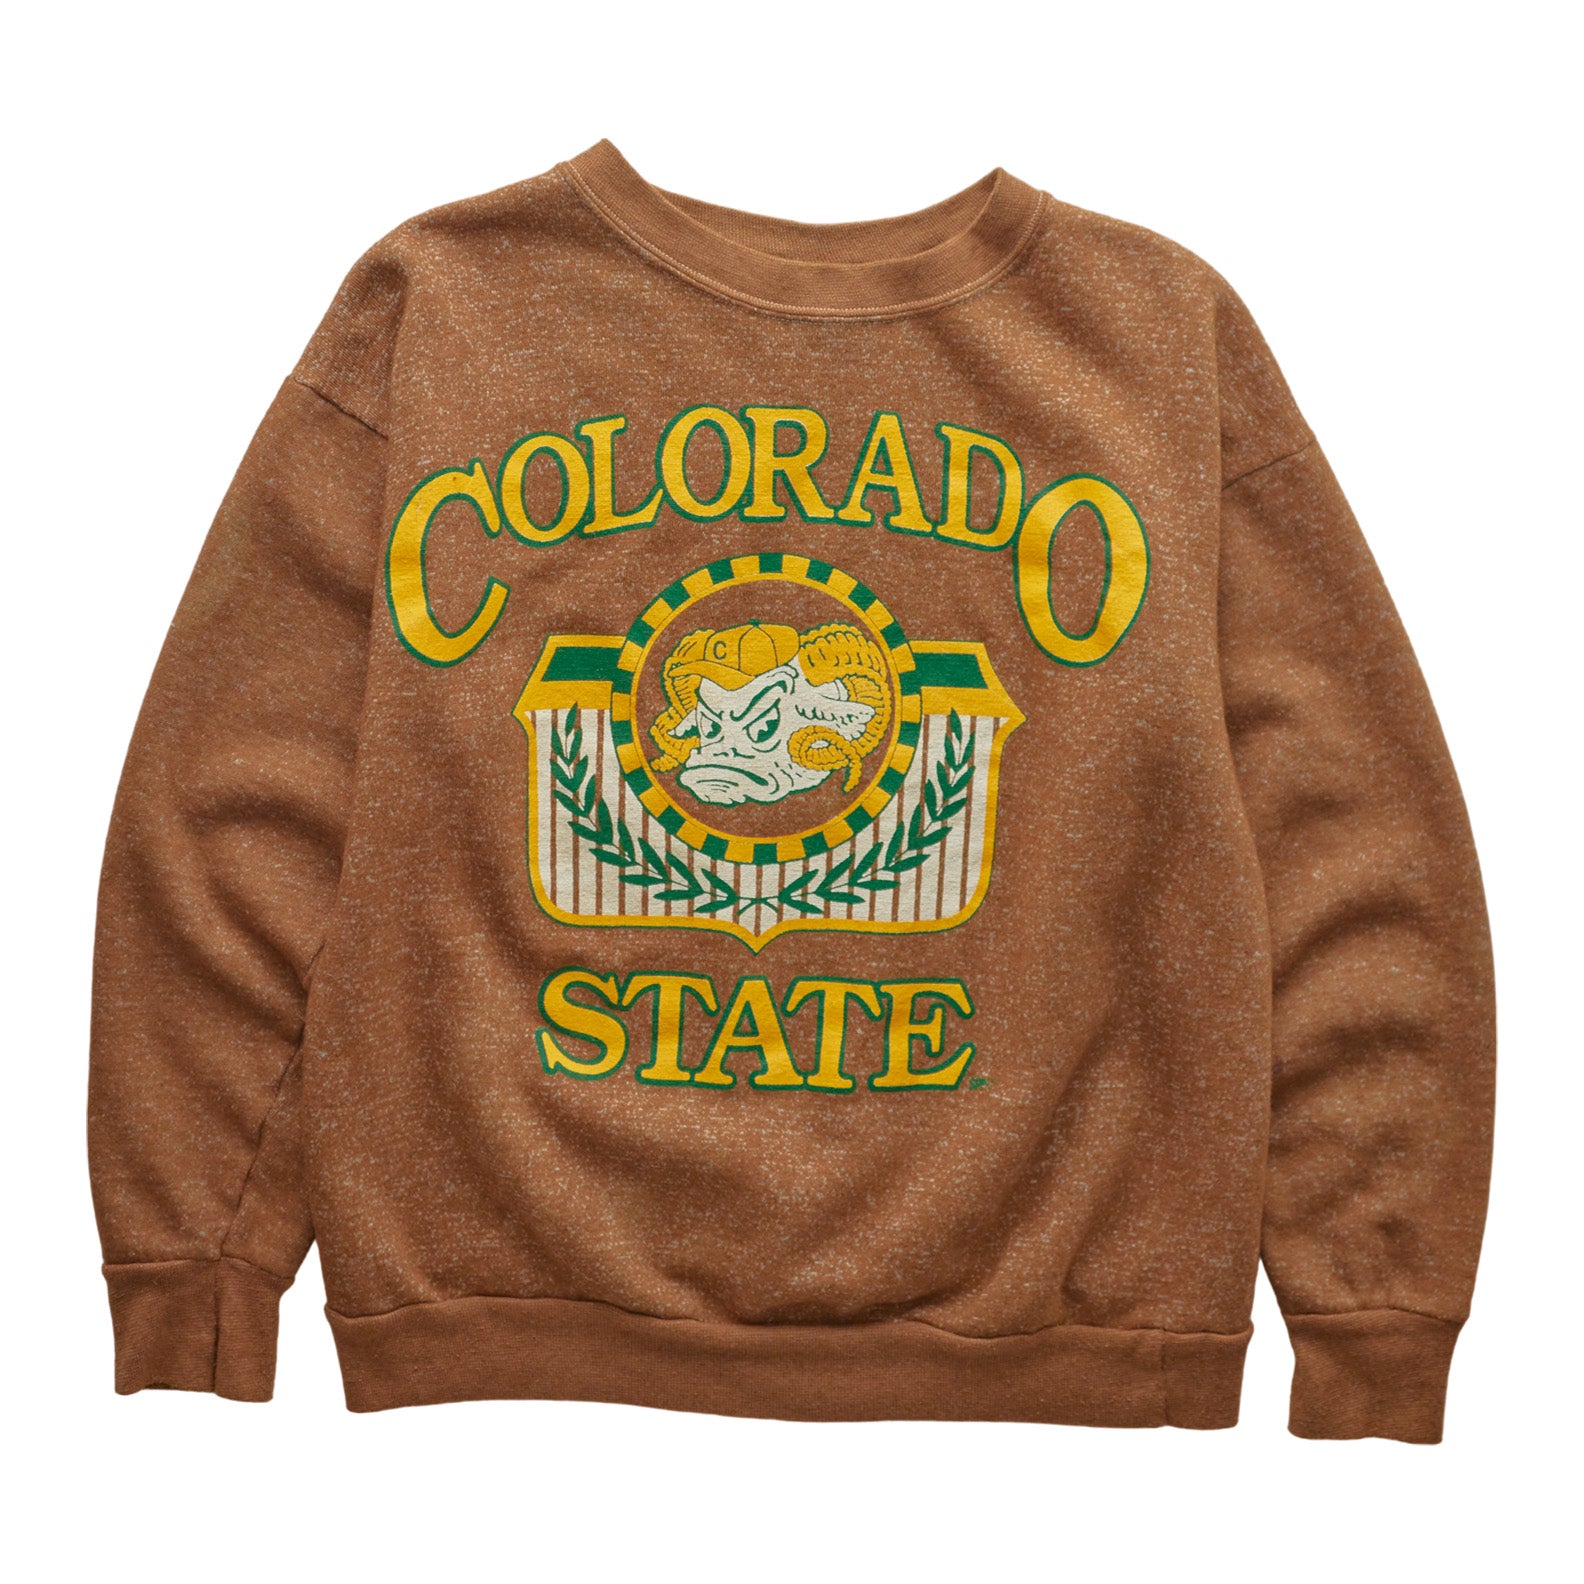 (XS/S) 90s Colorado State